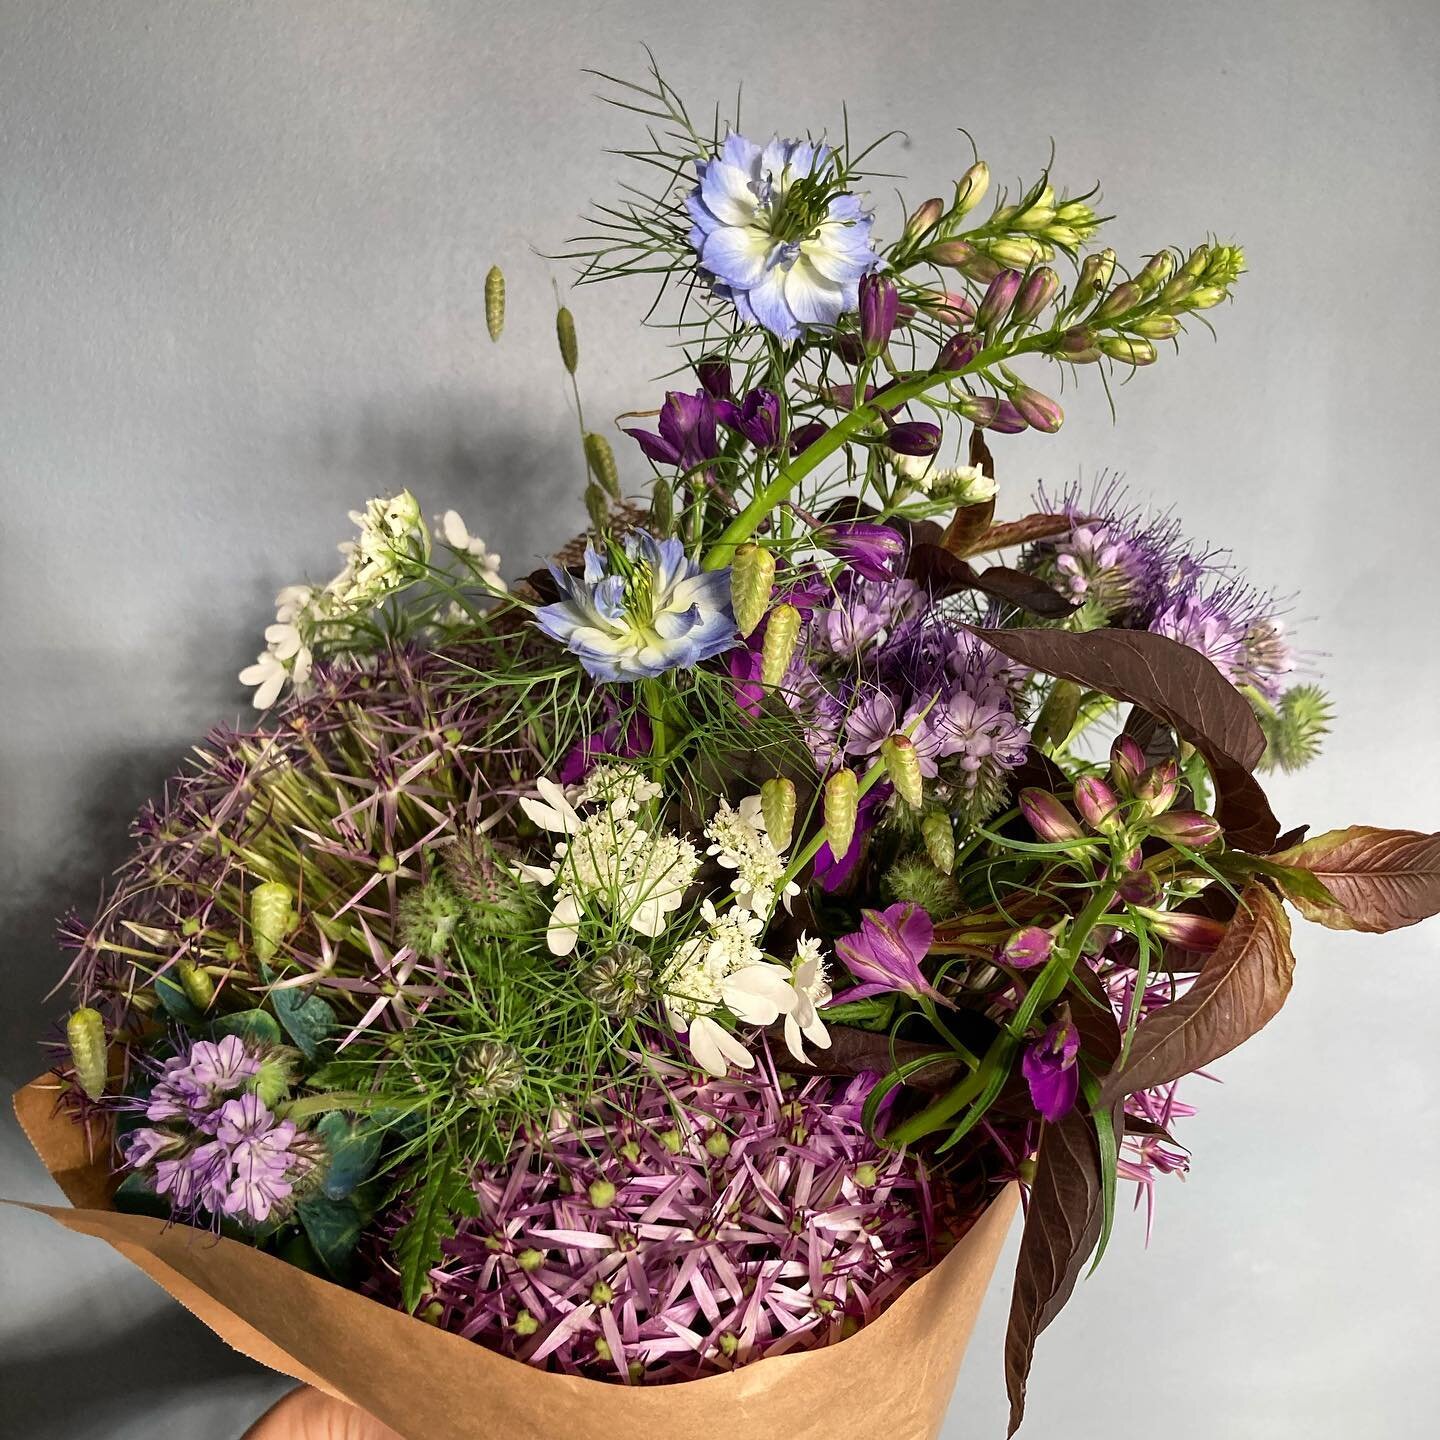 Fancy celebrating #brisishflowersweek with some locally grown and lovingly arranged Friday Flowers? ⁣
⁣
Posys (&pound;15) and bouquets (&pound;25, &pound;35,or Luxe &pound;45) available to order today for Friday or Saturday #Stalbans local delivery.⁣